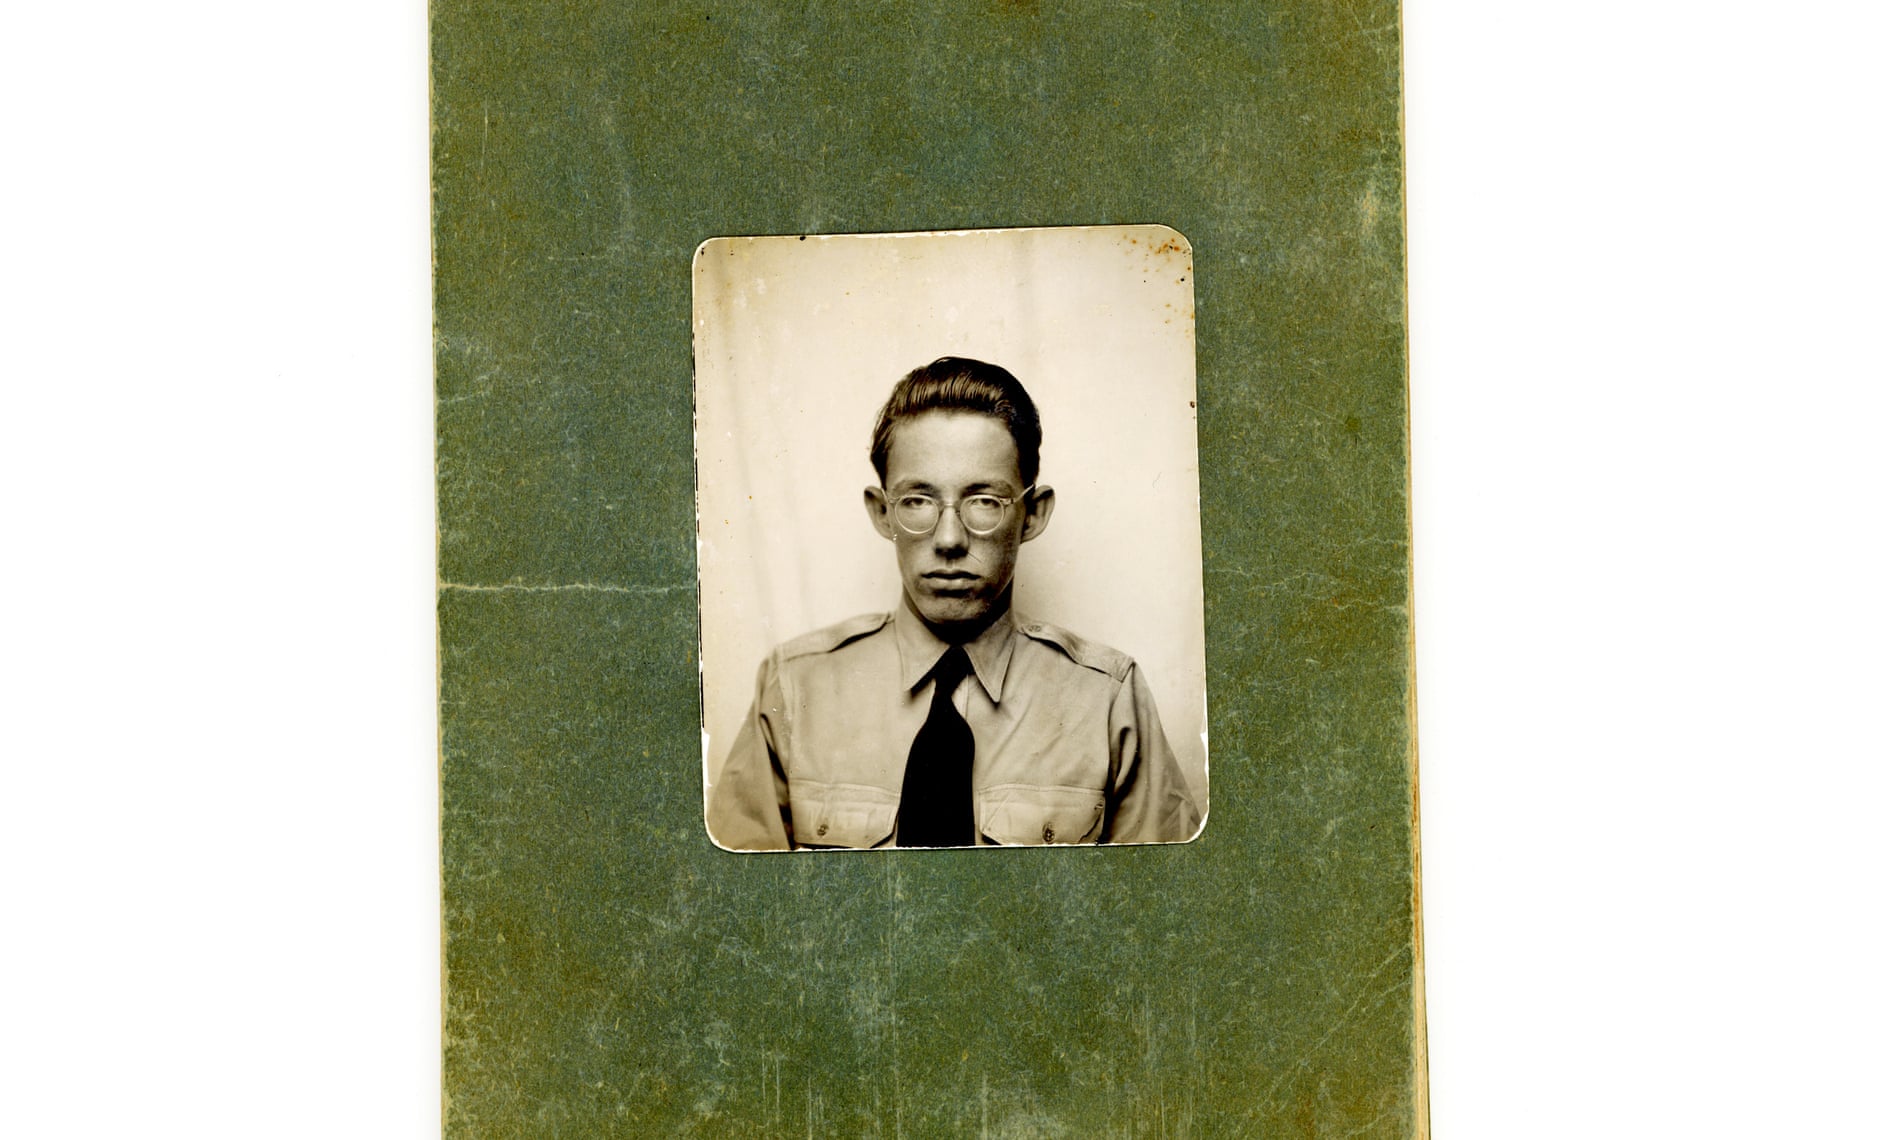 A photograph of William Luther Pierce from the archive of Kelvin Pierce.